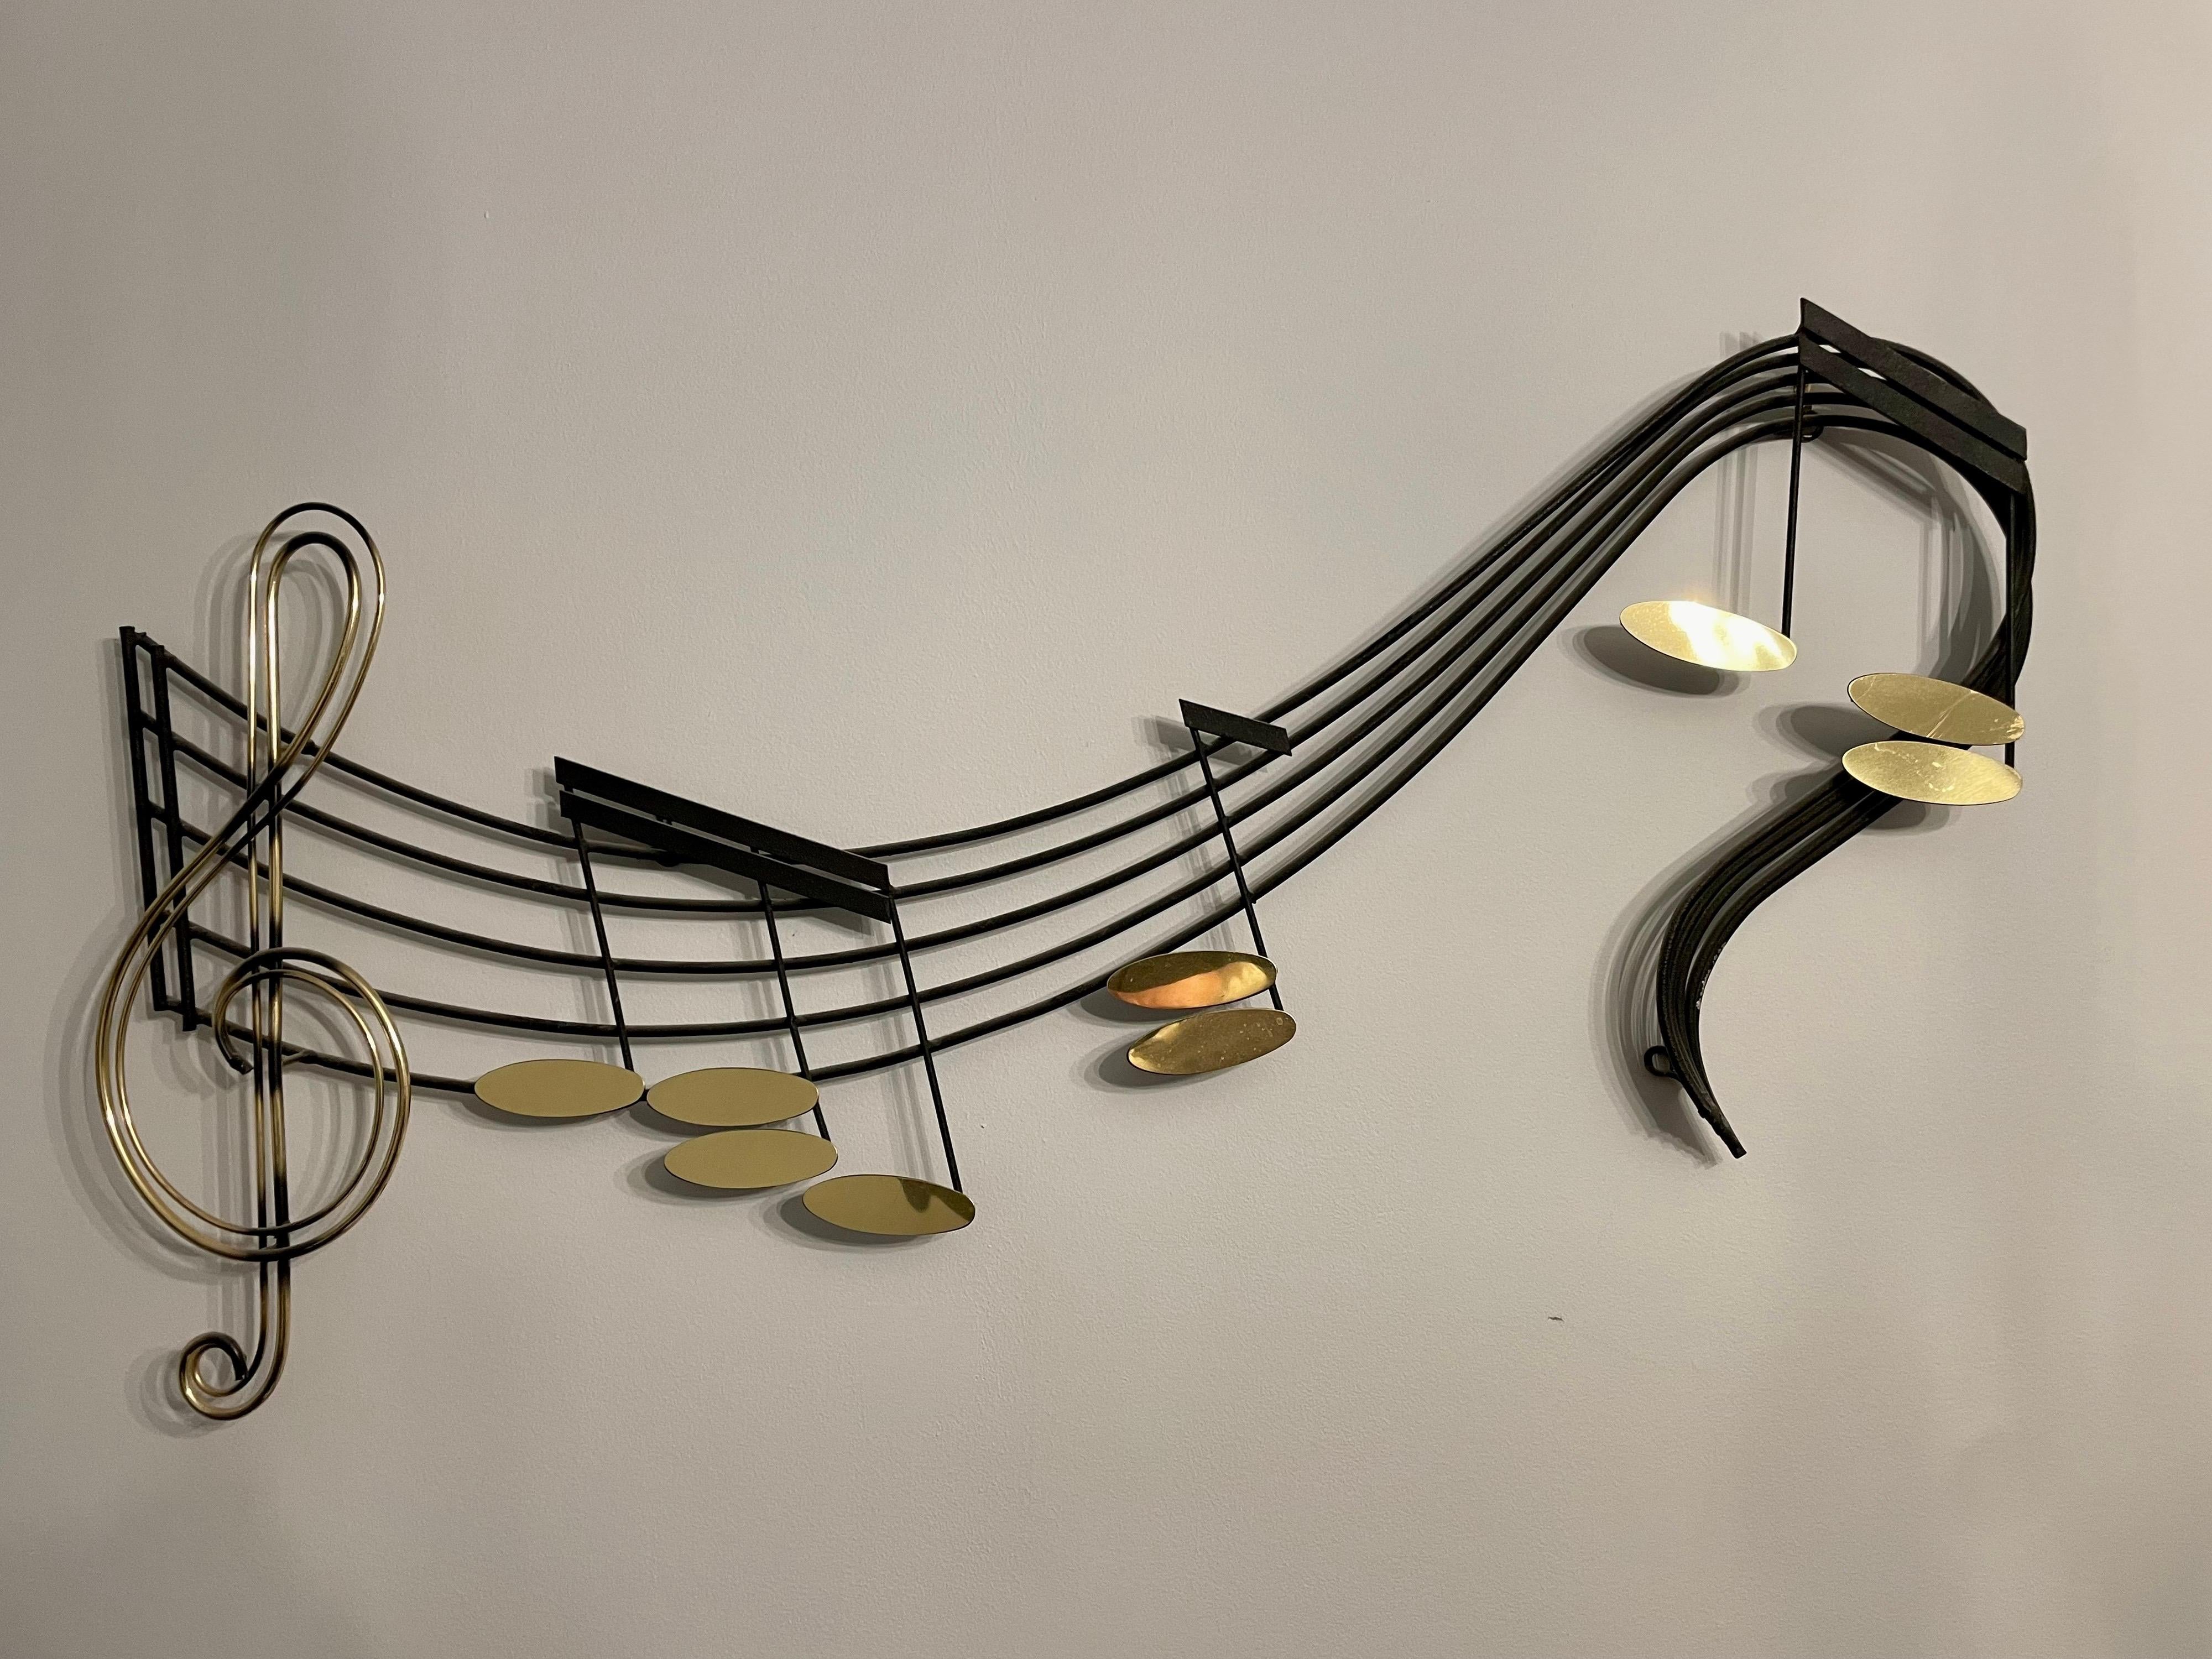 Curtis Jere music notes wall sculpture. Very nice vintage condition. Hung above the fireplace in the living room of the HBO Show The Sopranos.